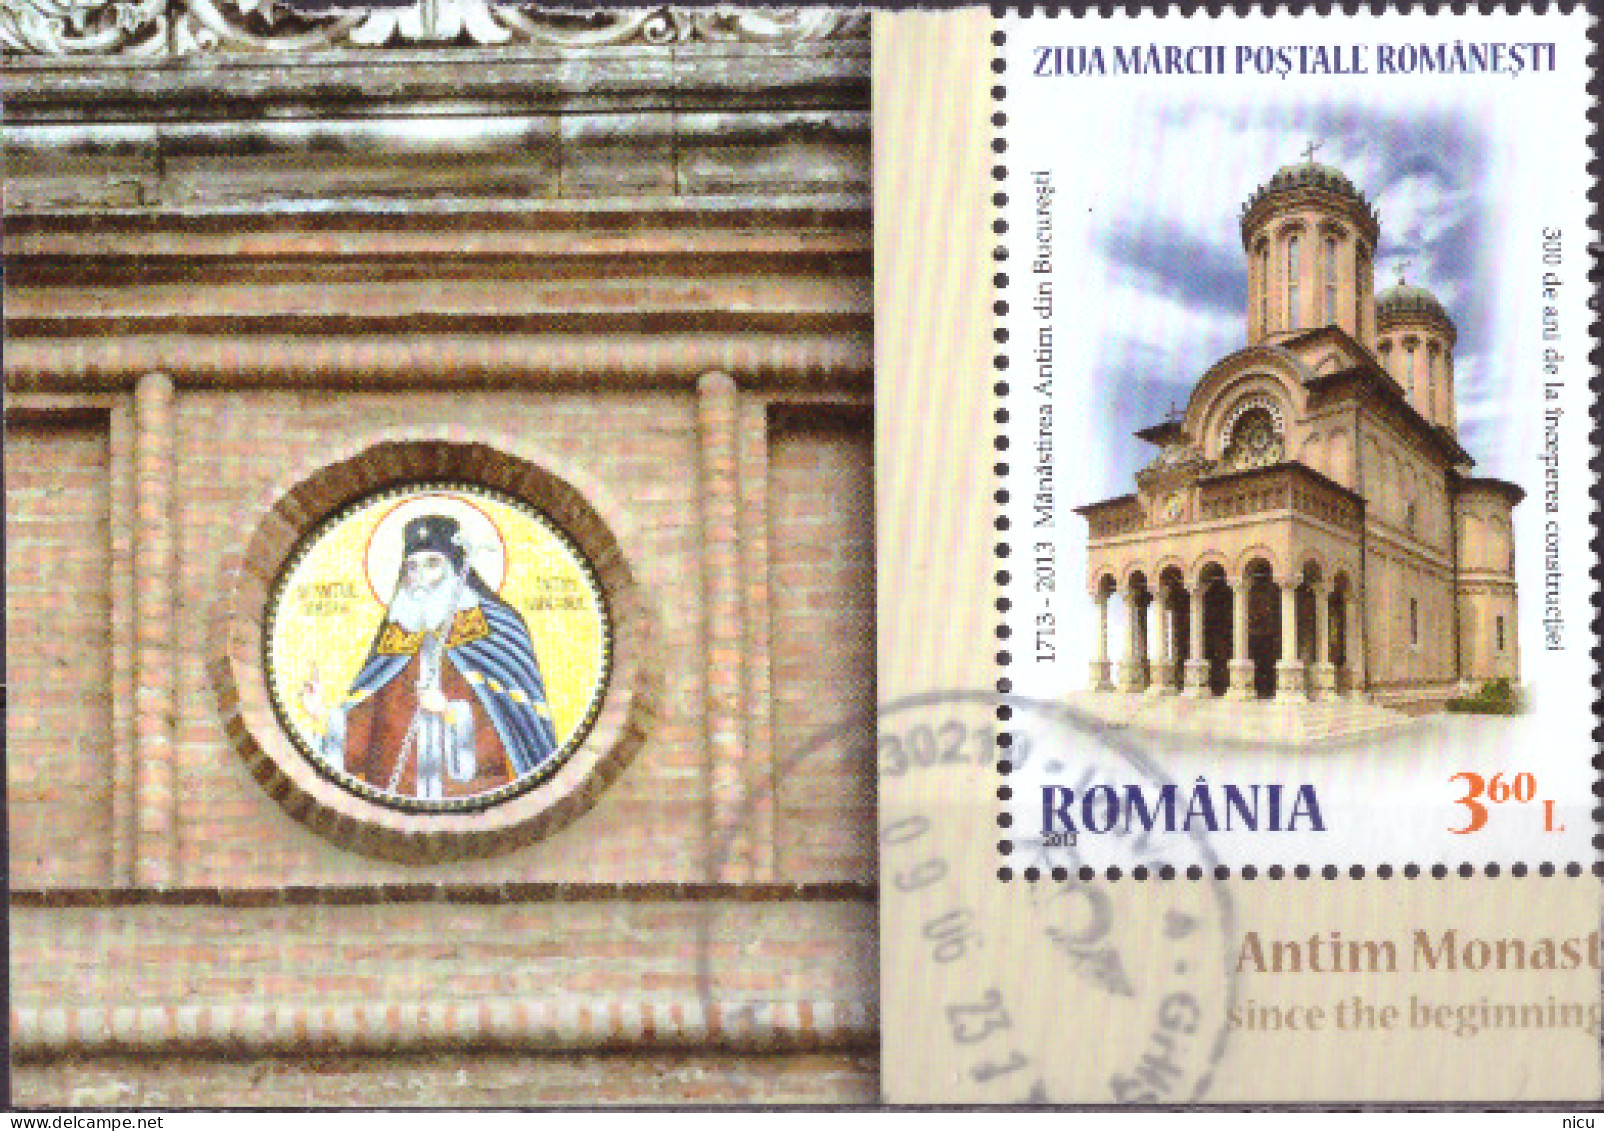 2013 - ROMAMIAN STAMP DAY - ANTIM MONASTRY FROM BUCHAREST - Used Stamps